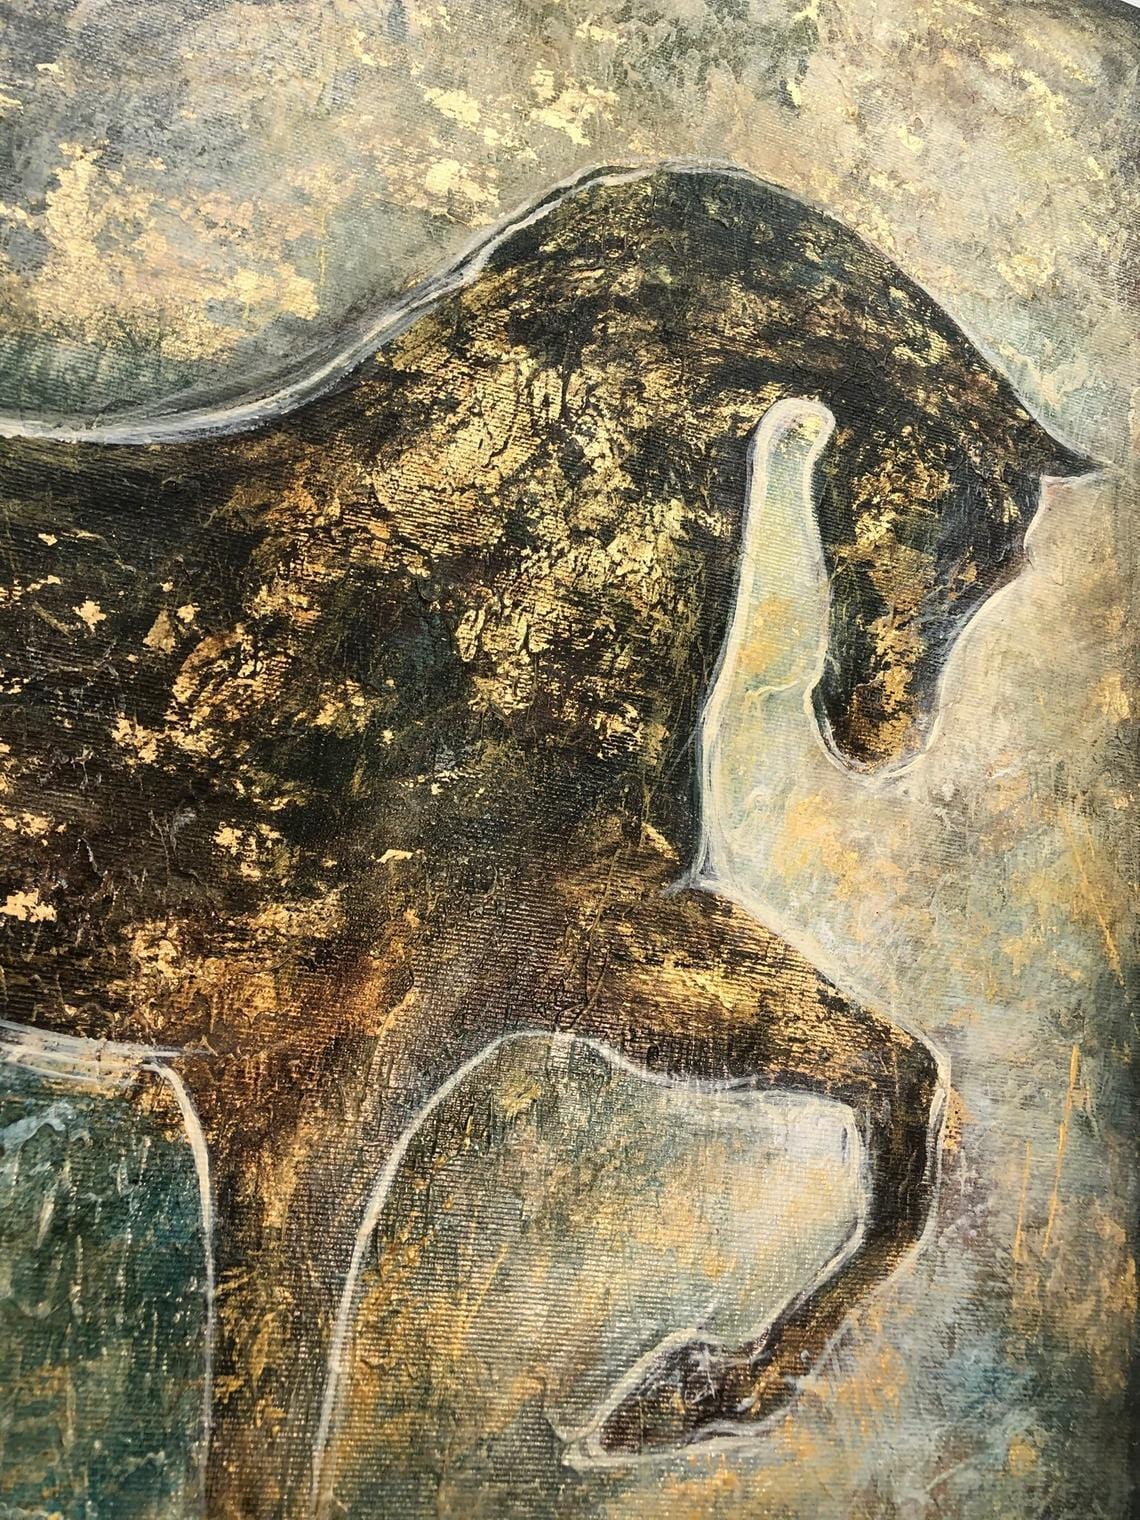 ABSTRACT HORSE